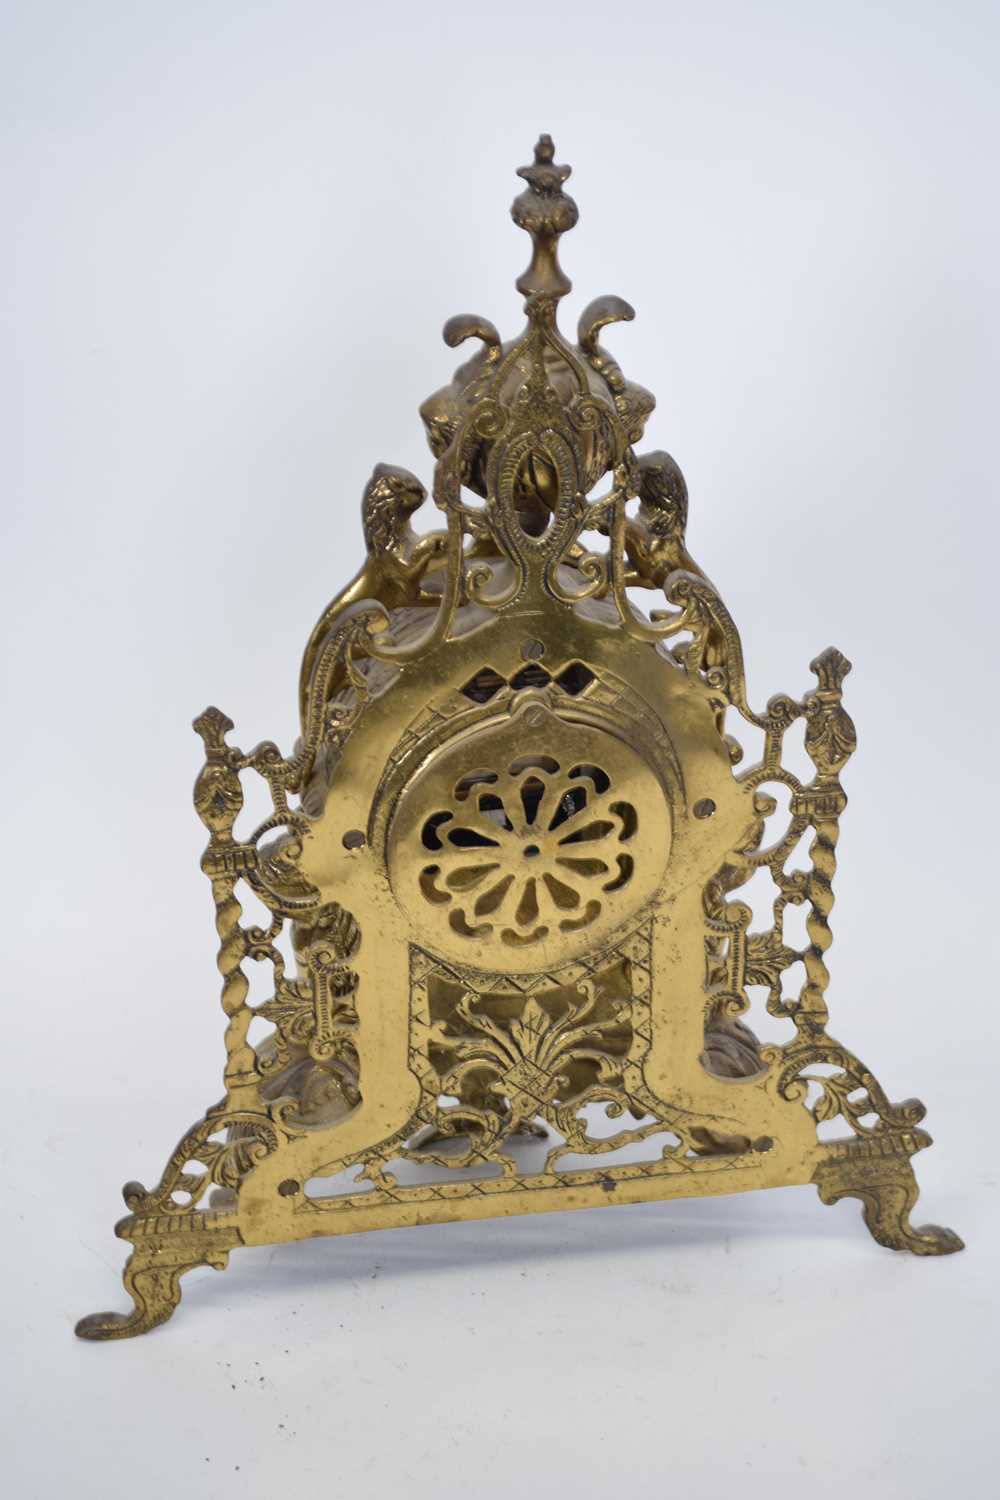 20th century Continental brass cased mantel clock set with a quartz movement, 46cm high - Image 2 of 2